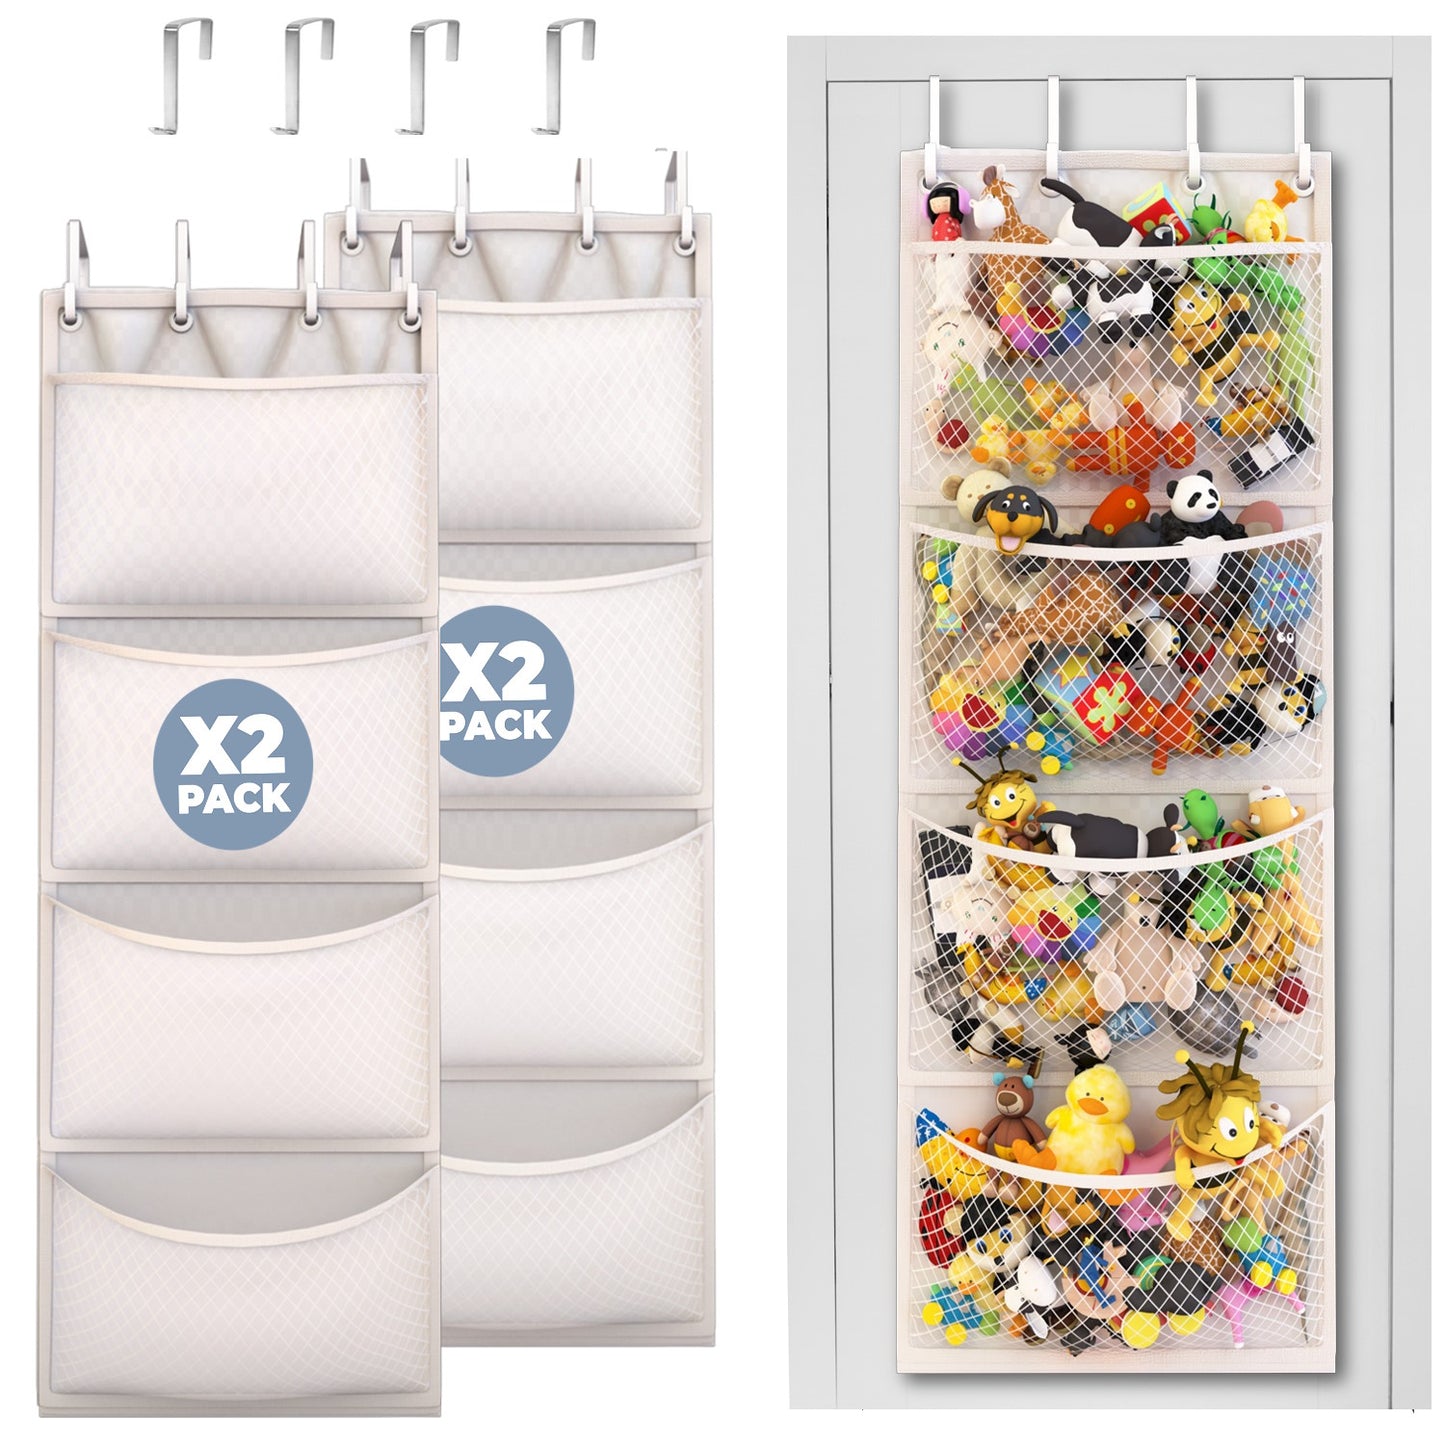 2 Pack - Storage for Stuffed Animal - Over Door Organizer for Stuffies, Baby Accessories, Toy Plush Storage/Easy Installation with Breathable